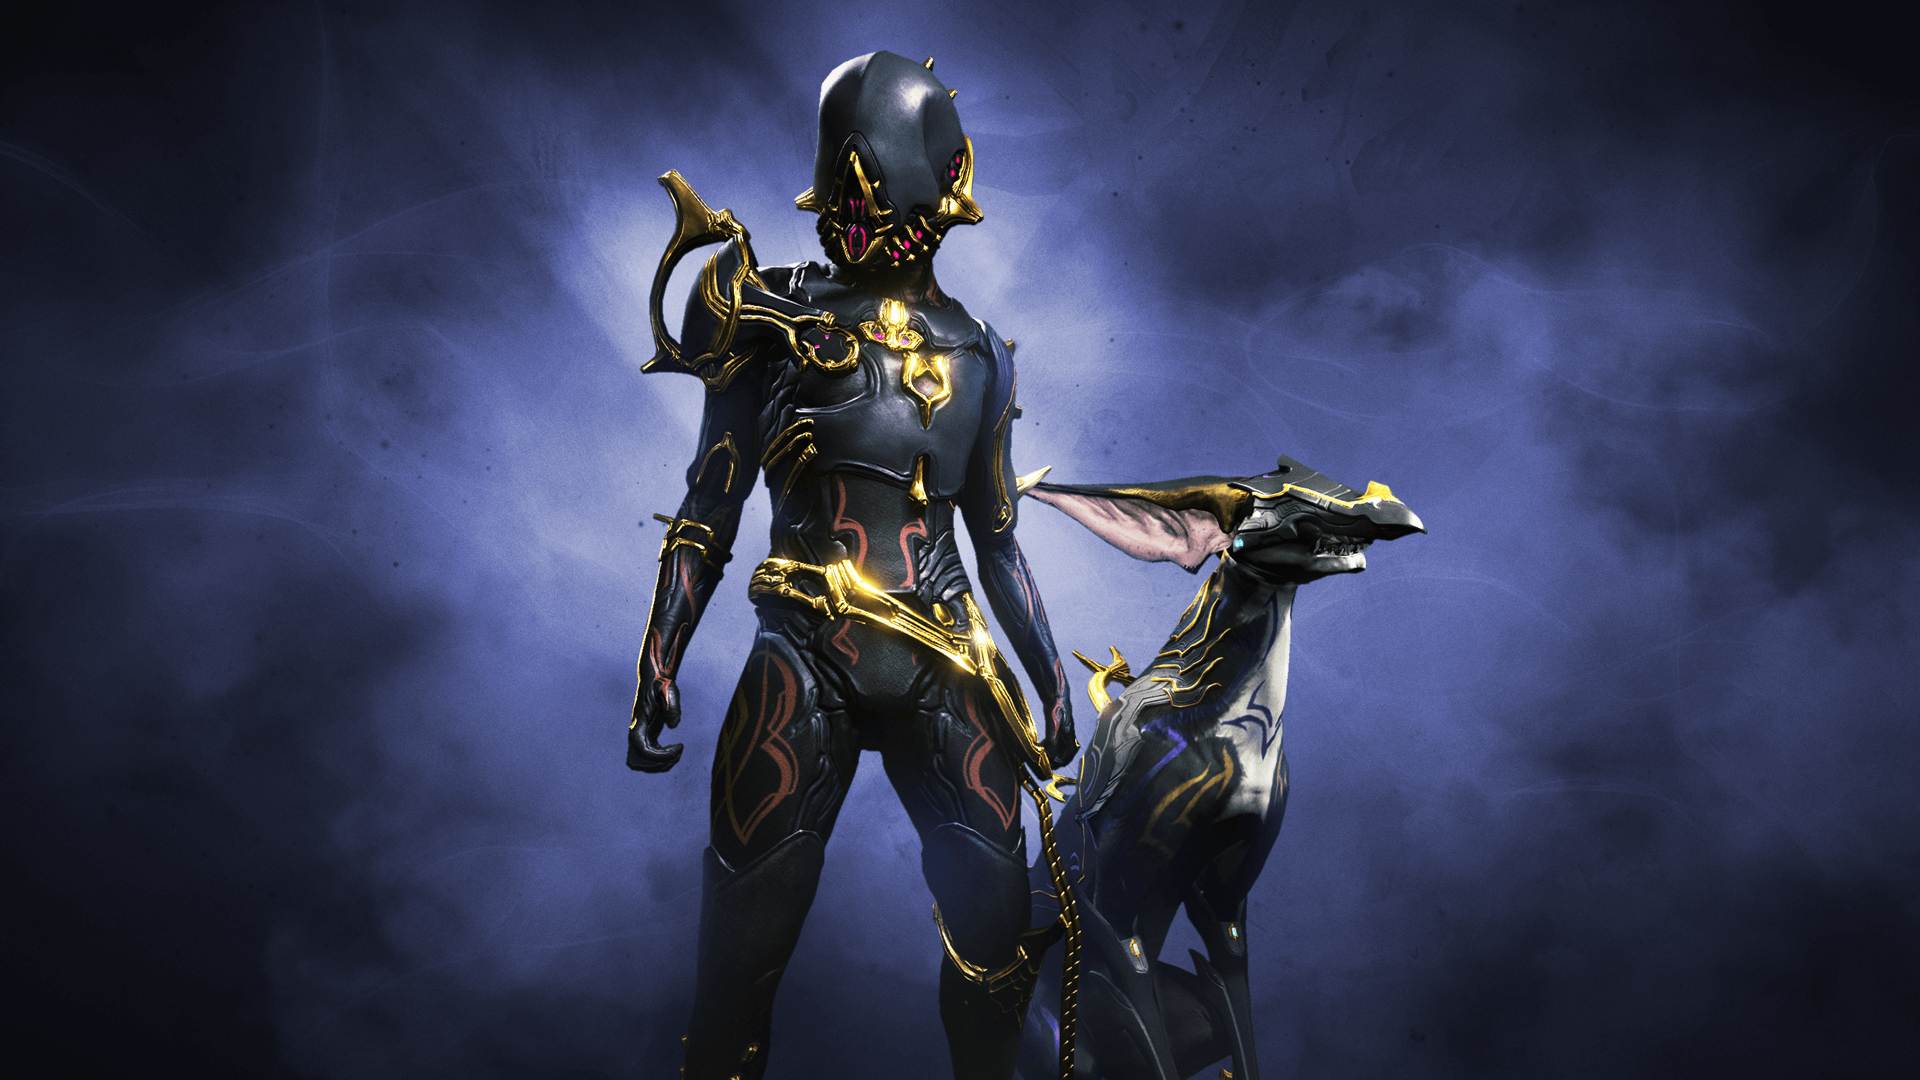 Zephyr Prime is coming to Warframe on March 20. 